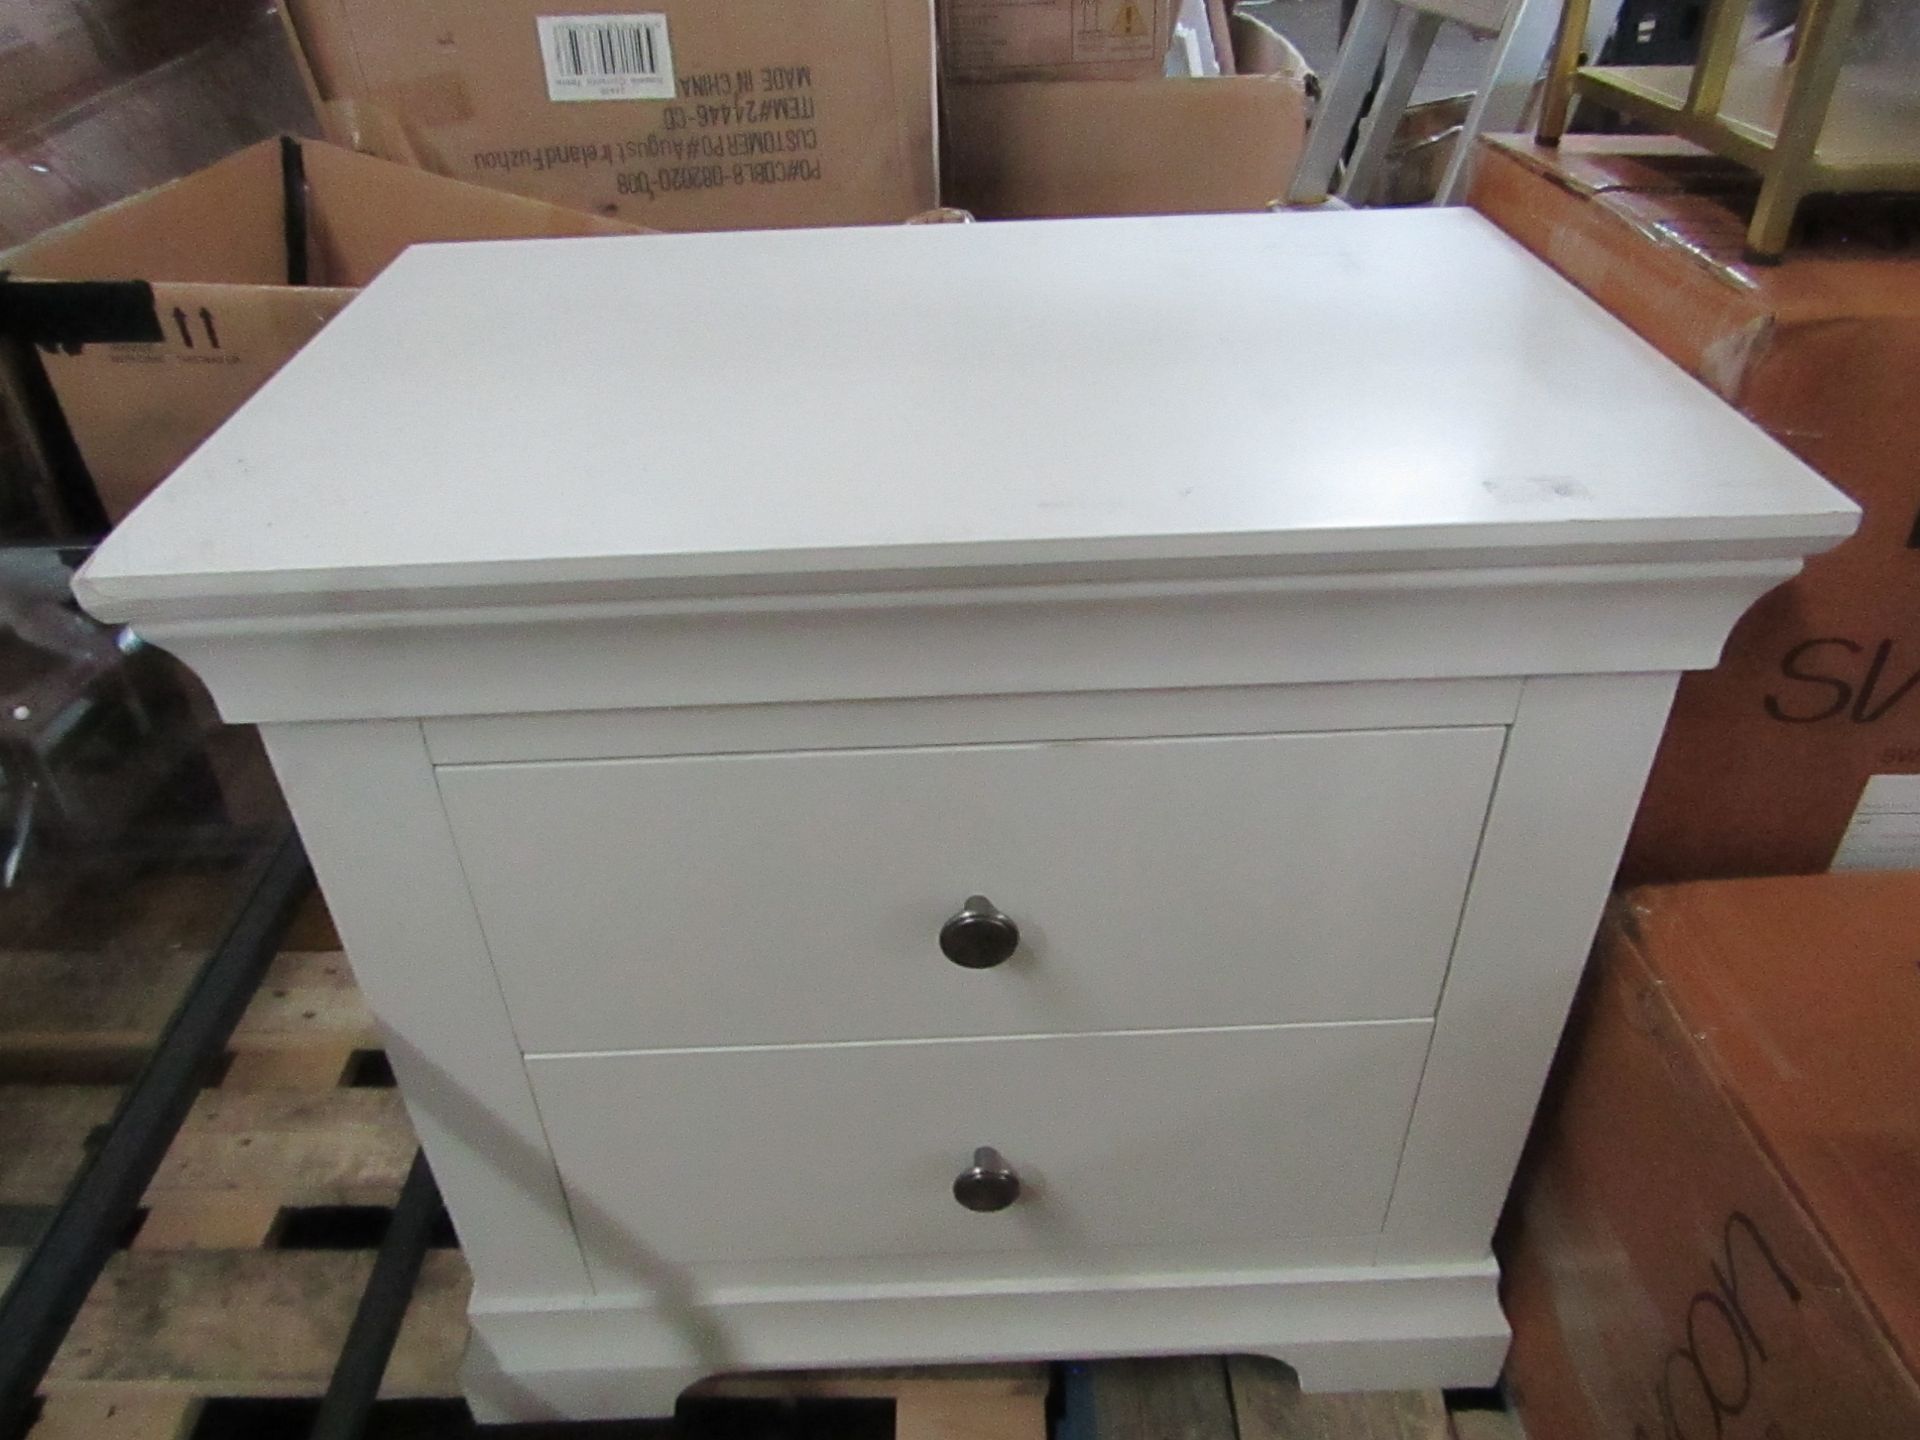 Cotswold Company Chantilly Warm White Jumbo Bedside Table RRP Â£245.00 - This item looks to be in